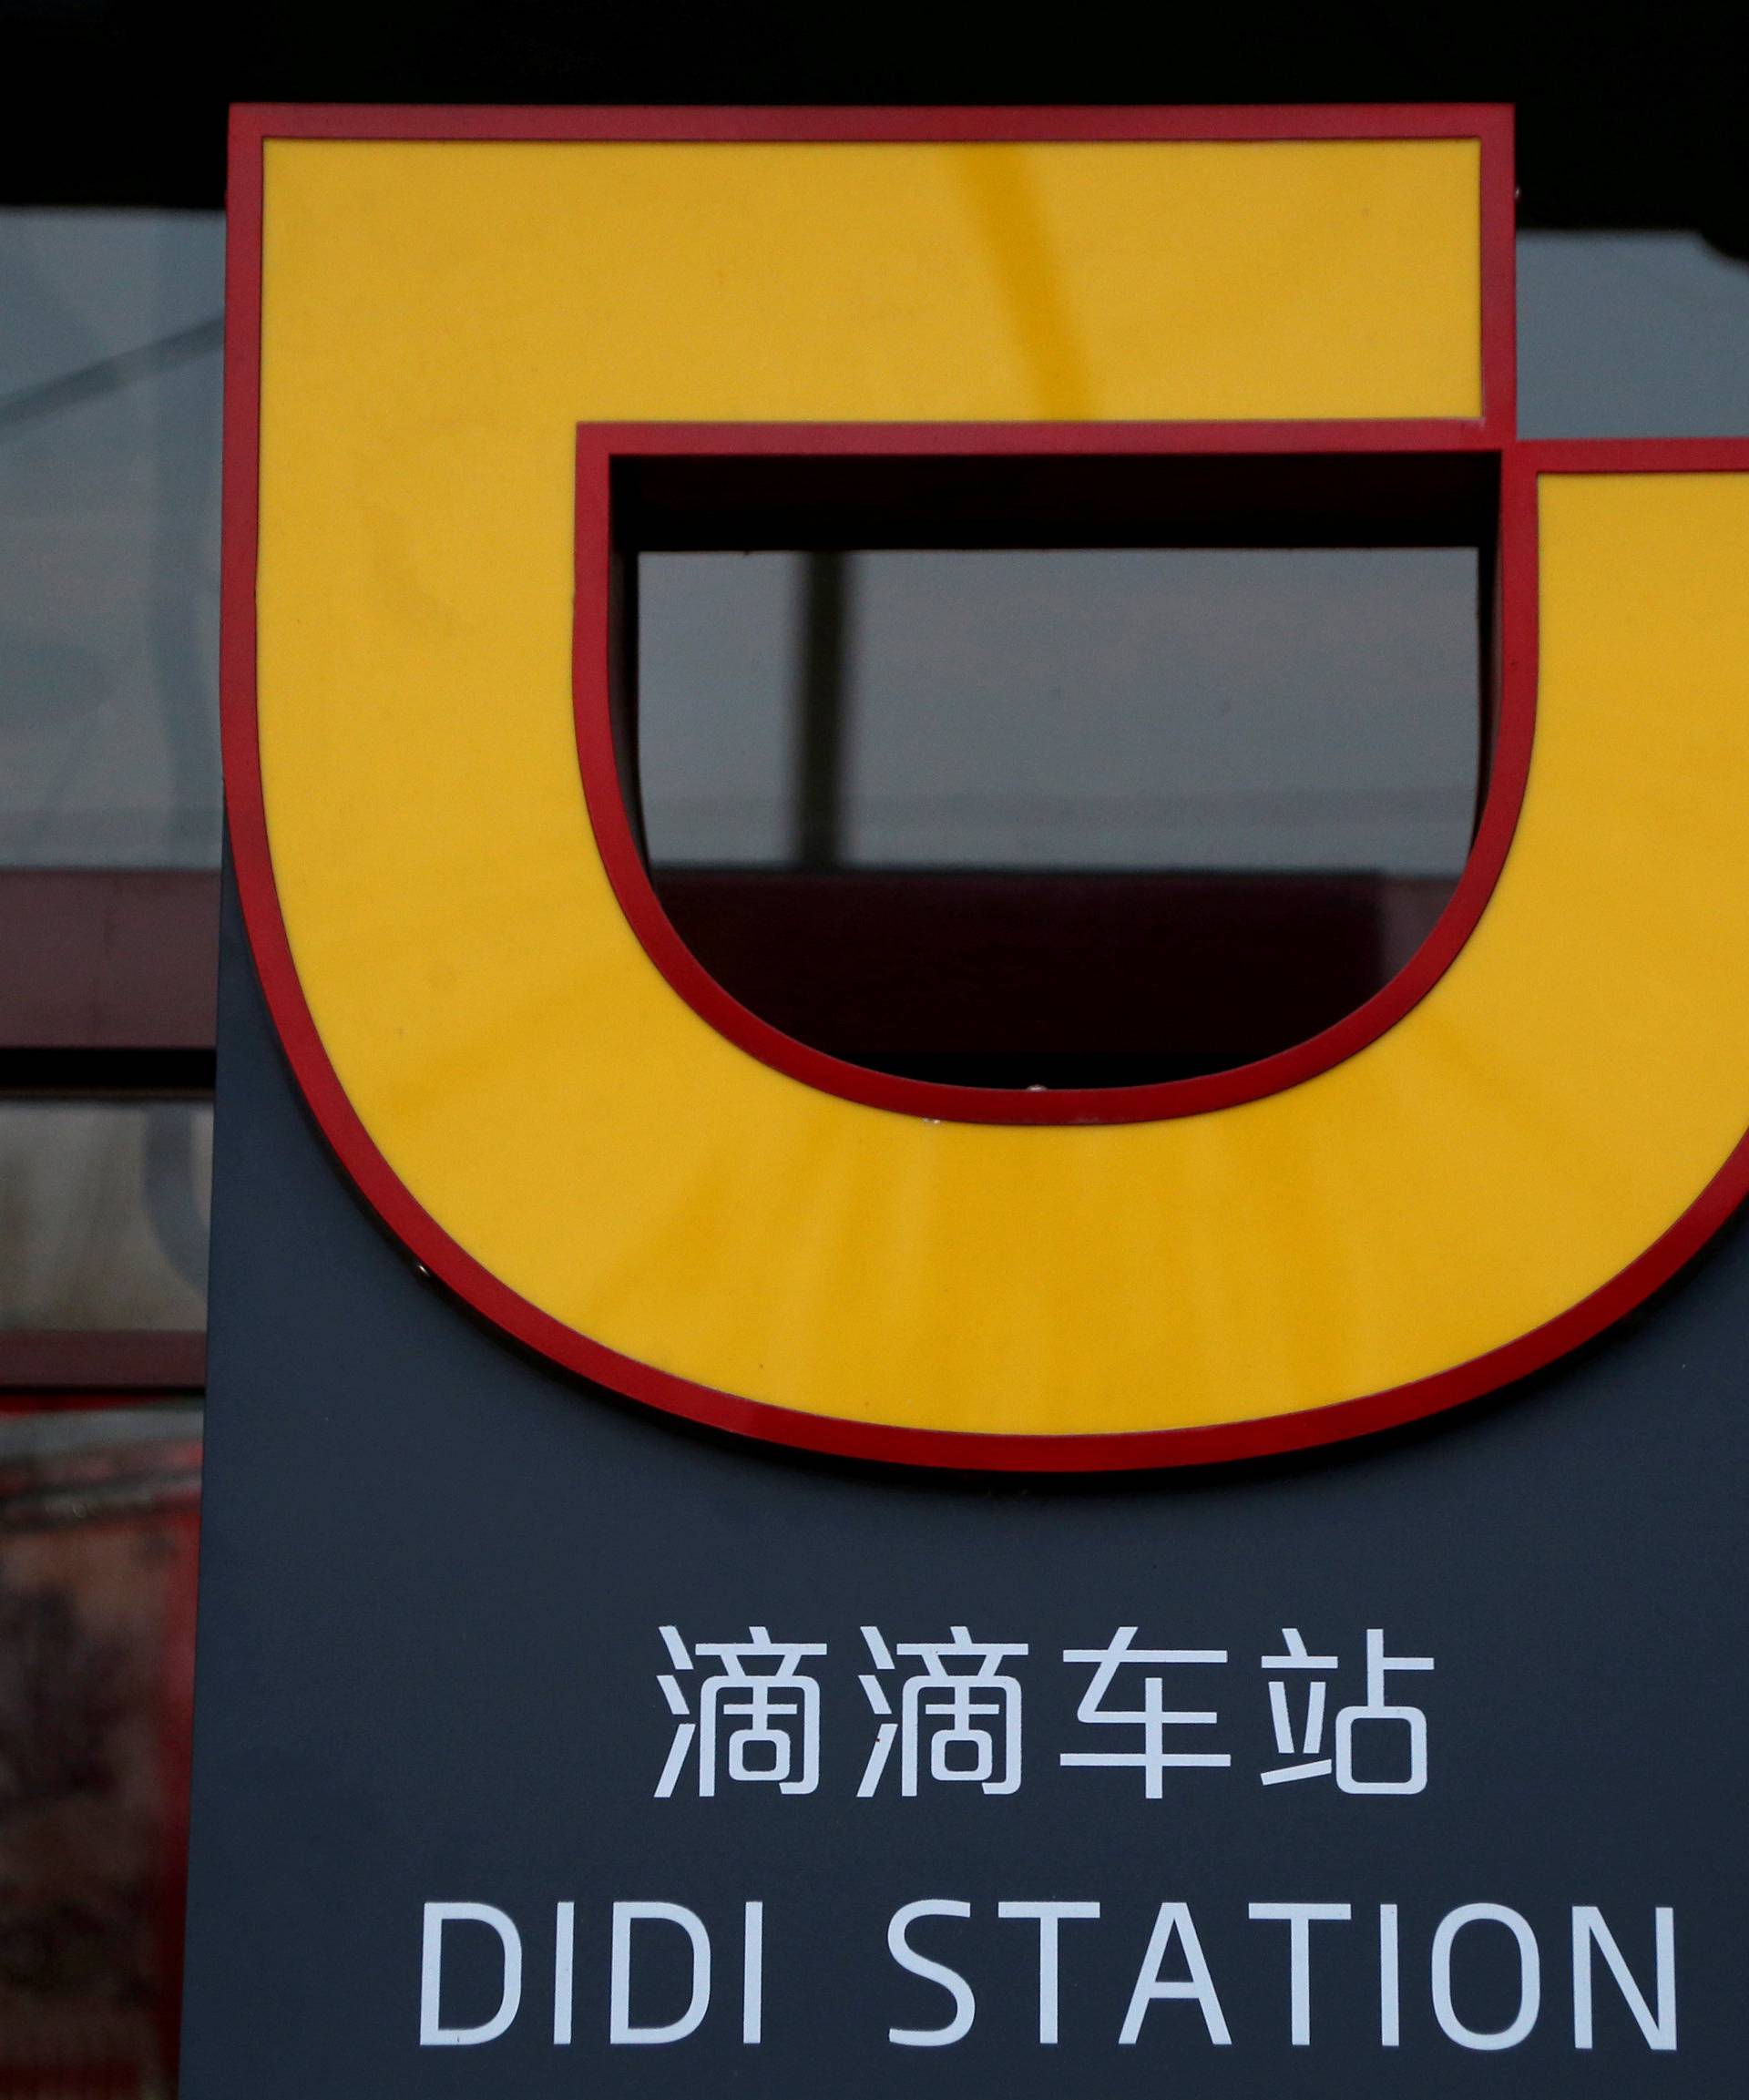 FILE PHOTO: The logo of Didi Chuxing is seen at a Didi station in Beijing